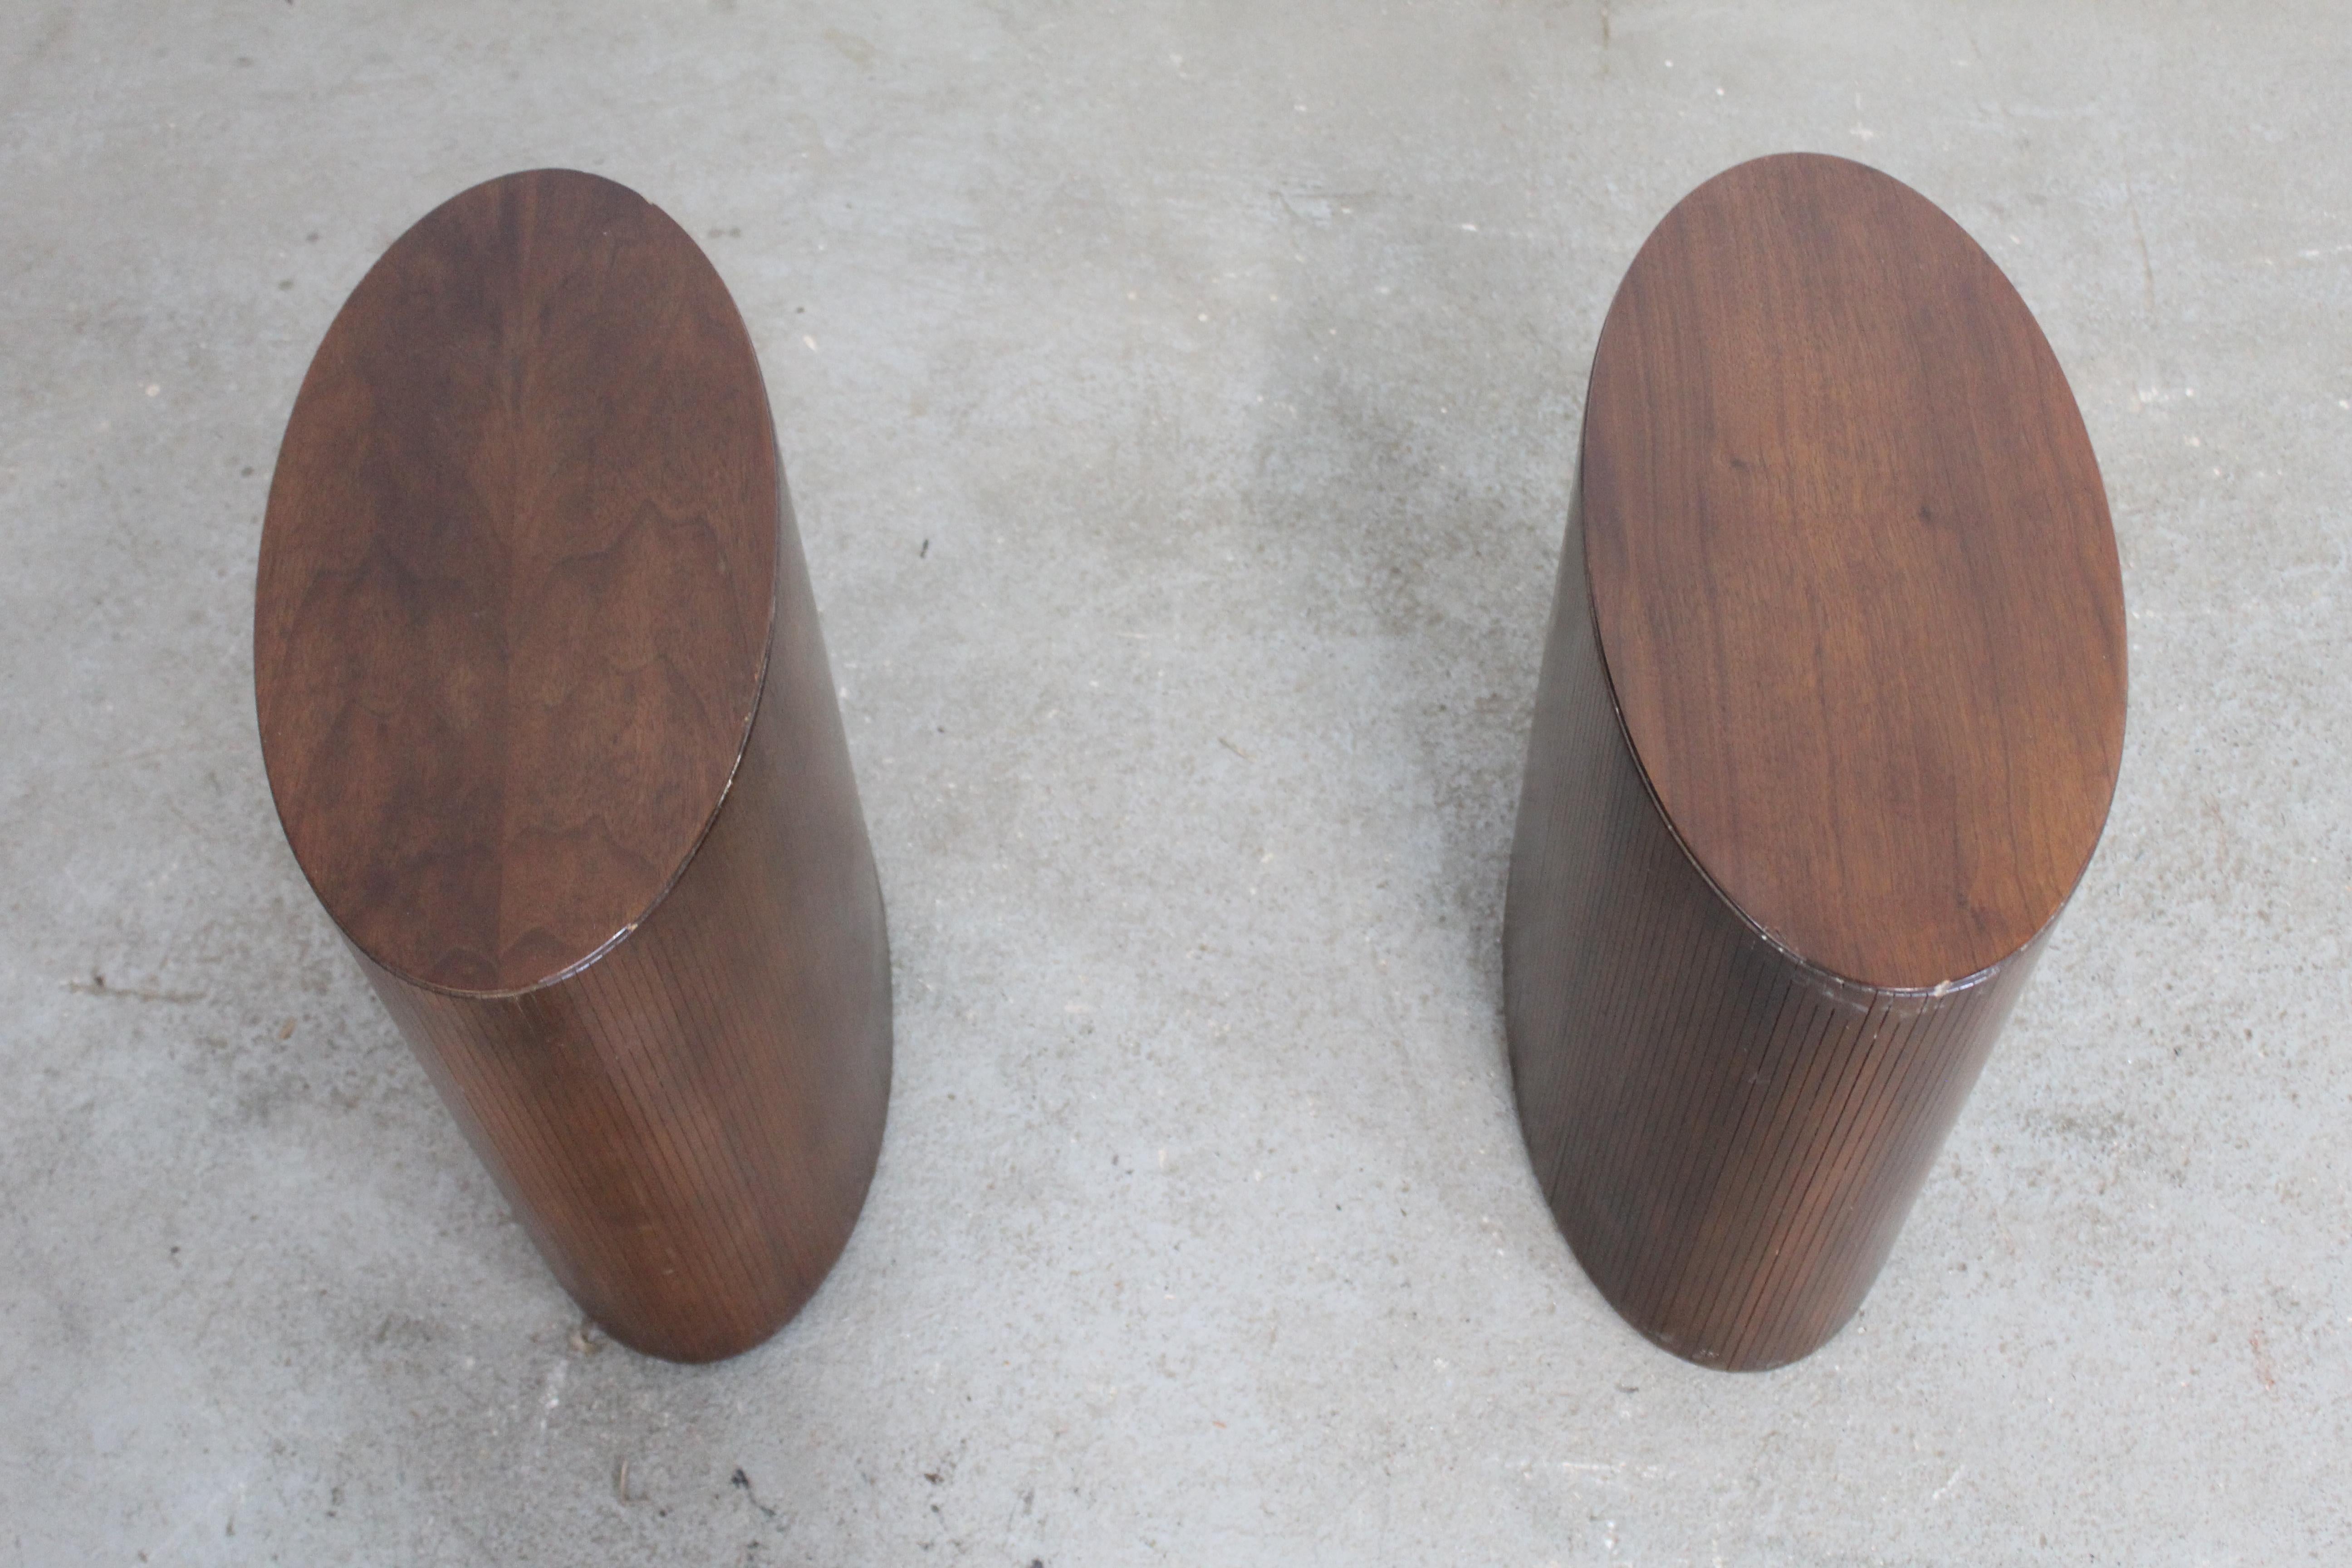 Pair of Mid-Century Modern Oval Walnut Pedestal/Stands/End Table by Lane For Sale 4